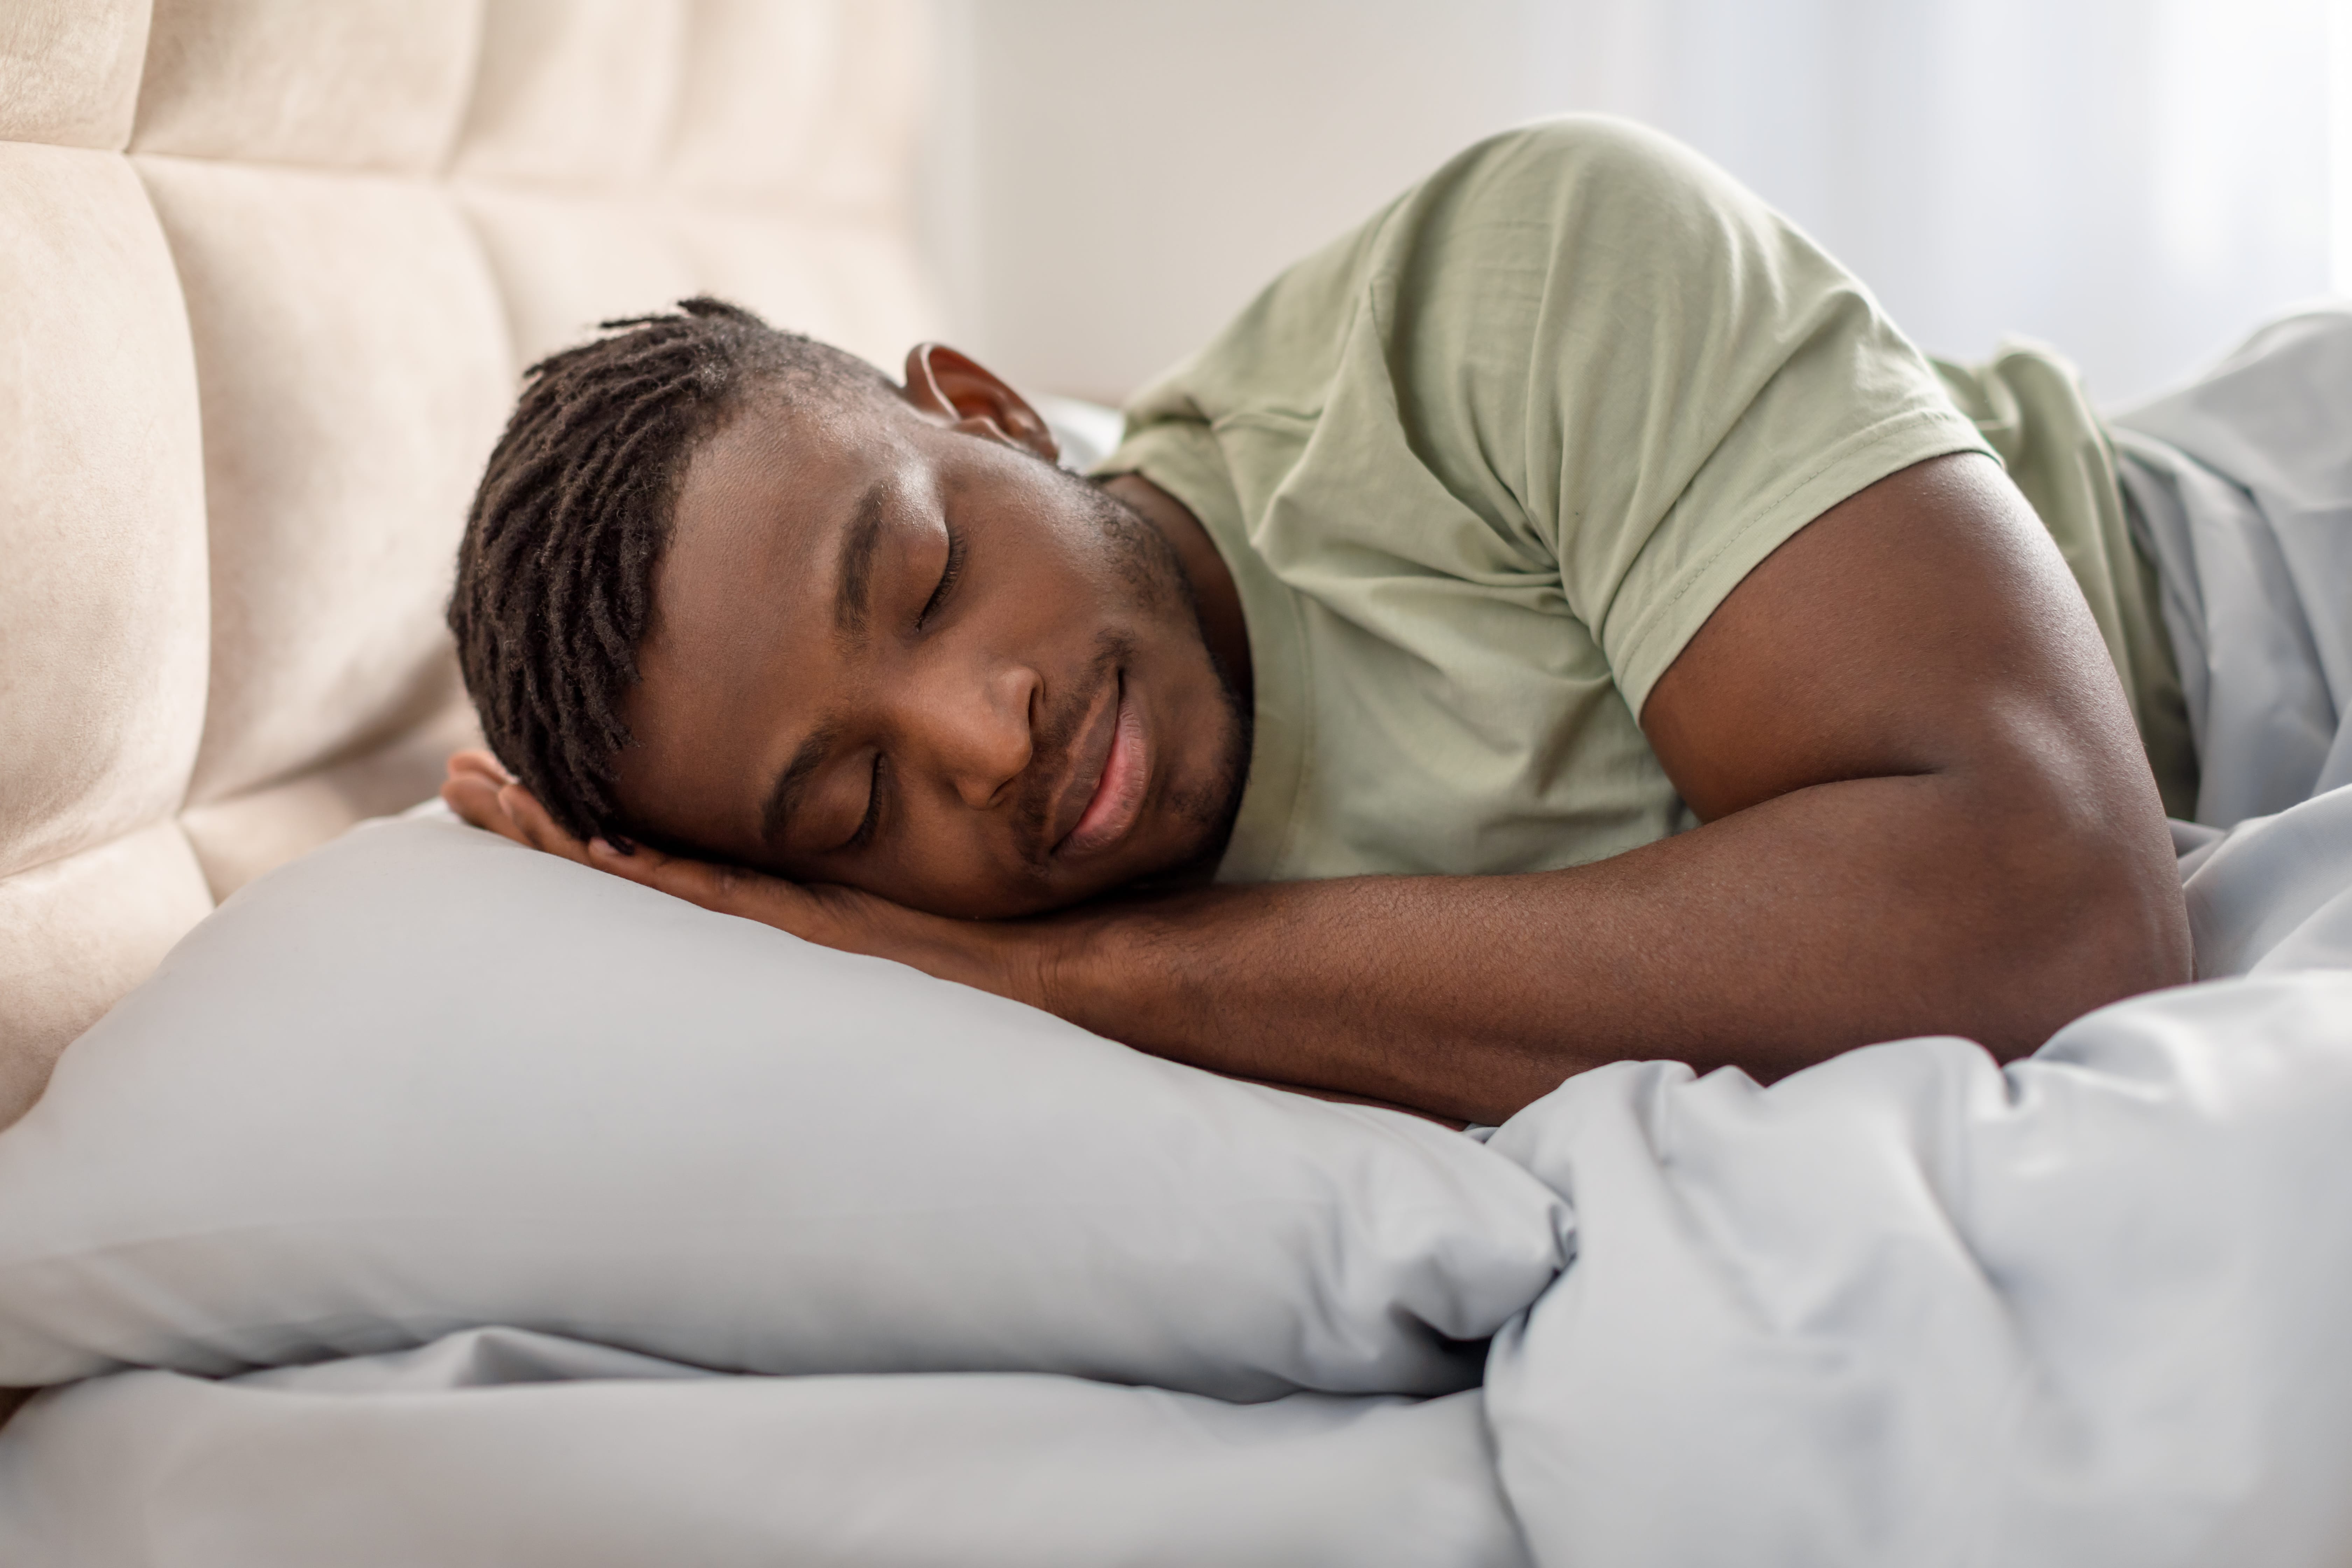 A man sleeping soundly on his side, alone in bed, with plenty of space to move around and no worry of disturbing a bed partner.